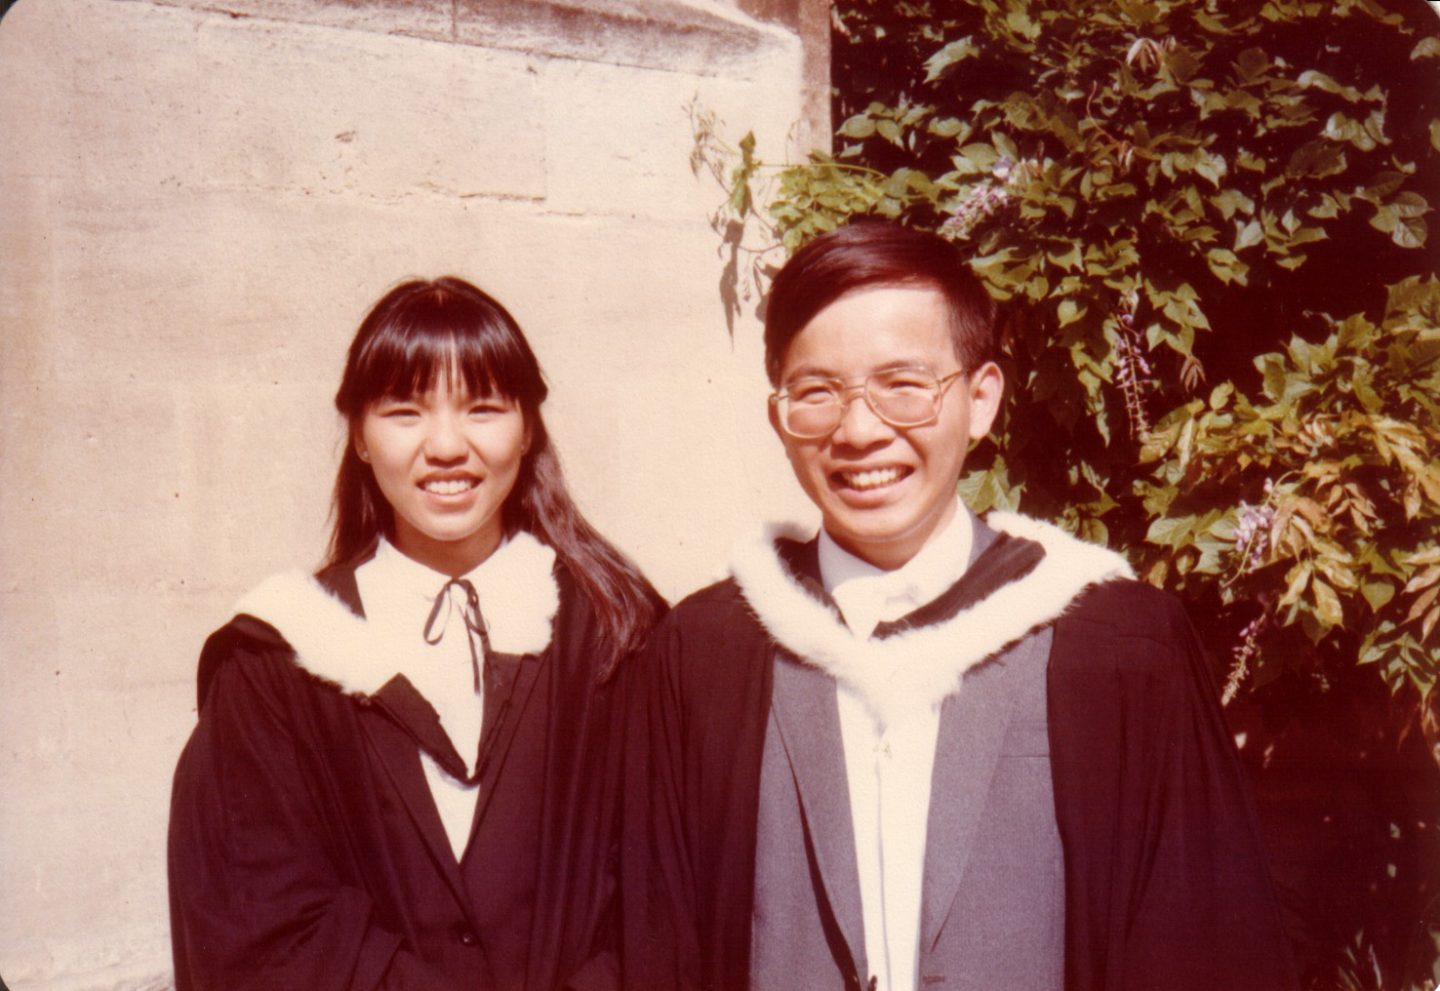 David and Sharon at their Oxford graduation in 1986.